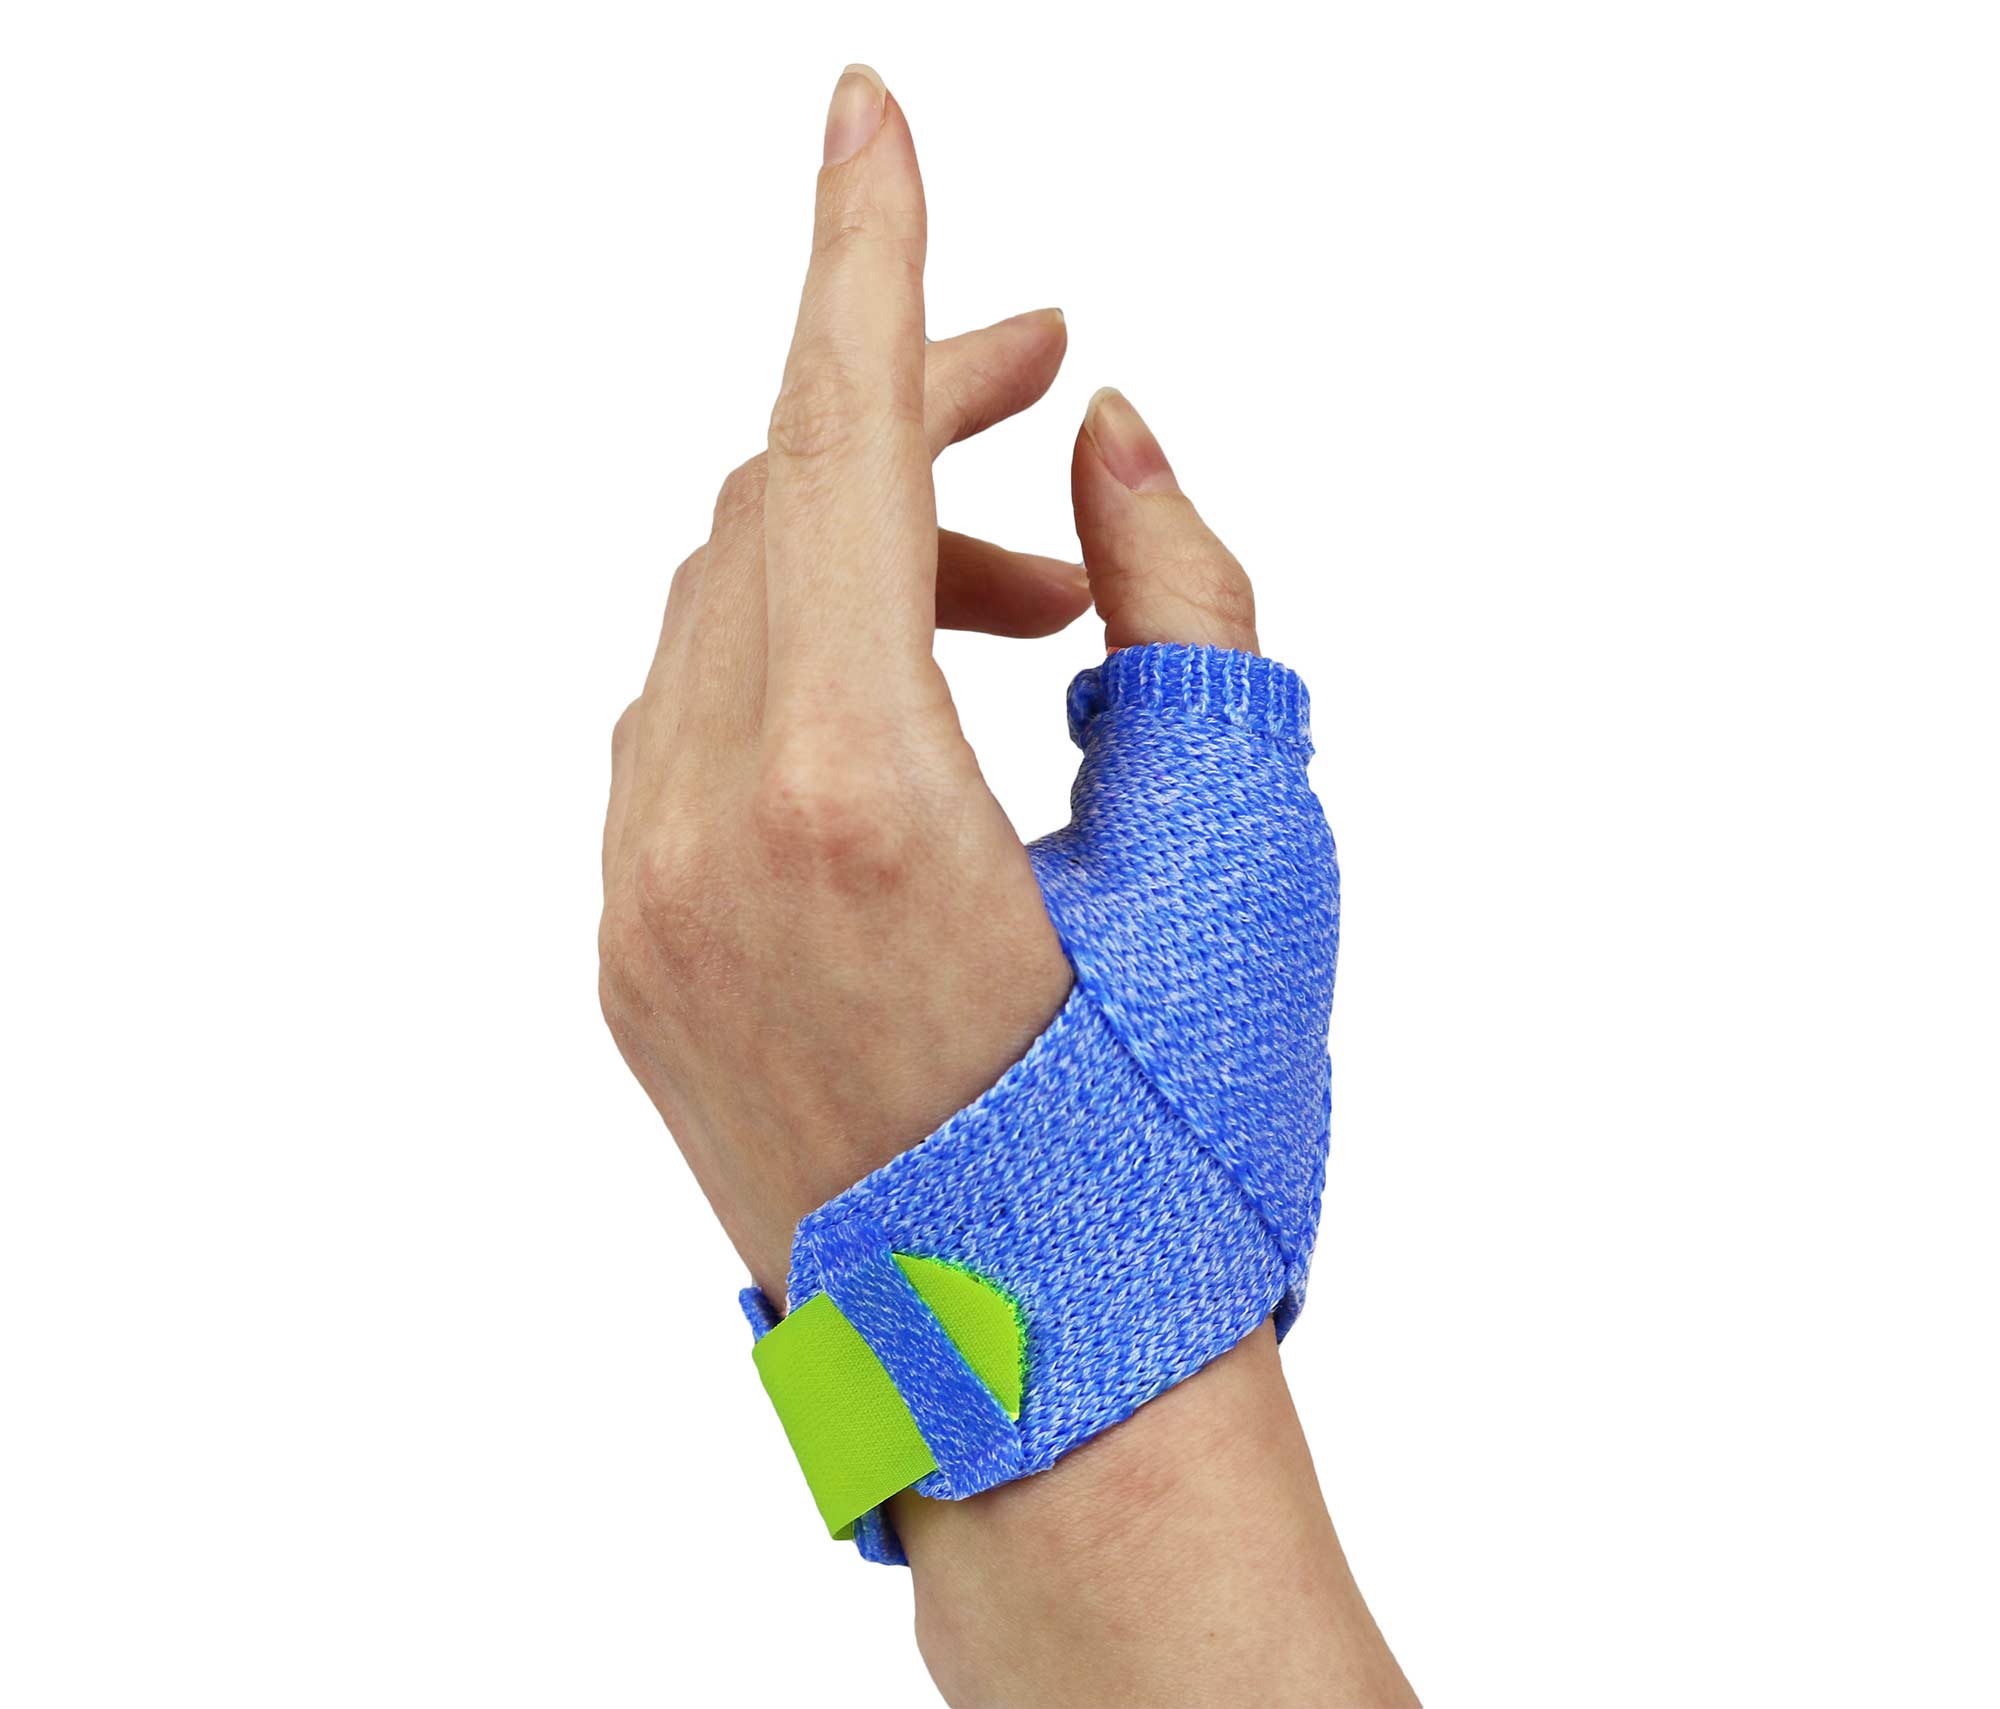 Blue Orficast orthosis with yellow hook-and-loop strapping